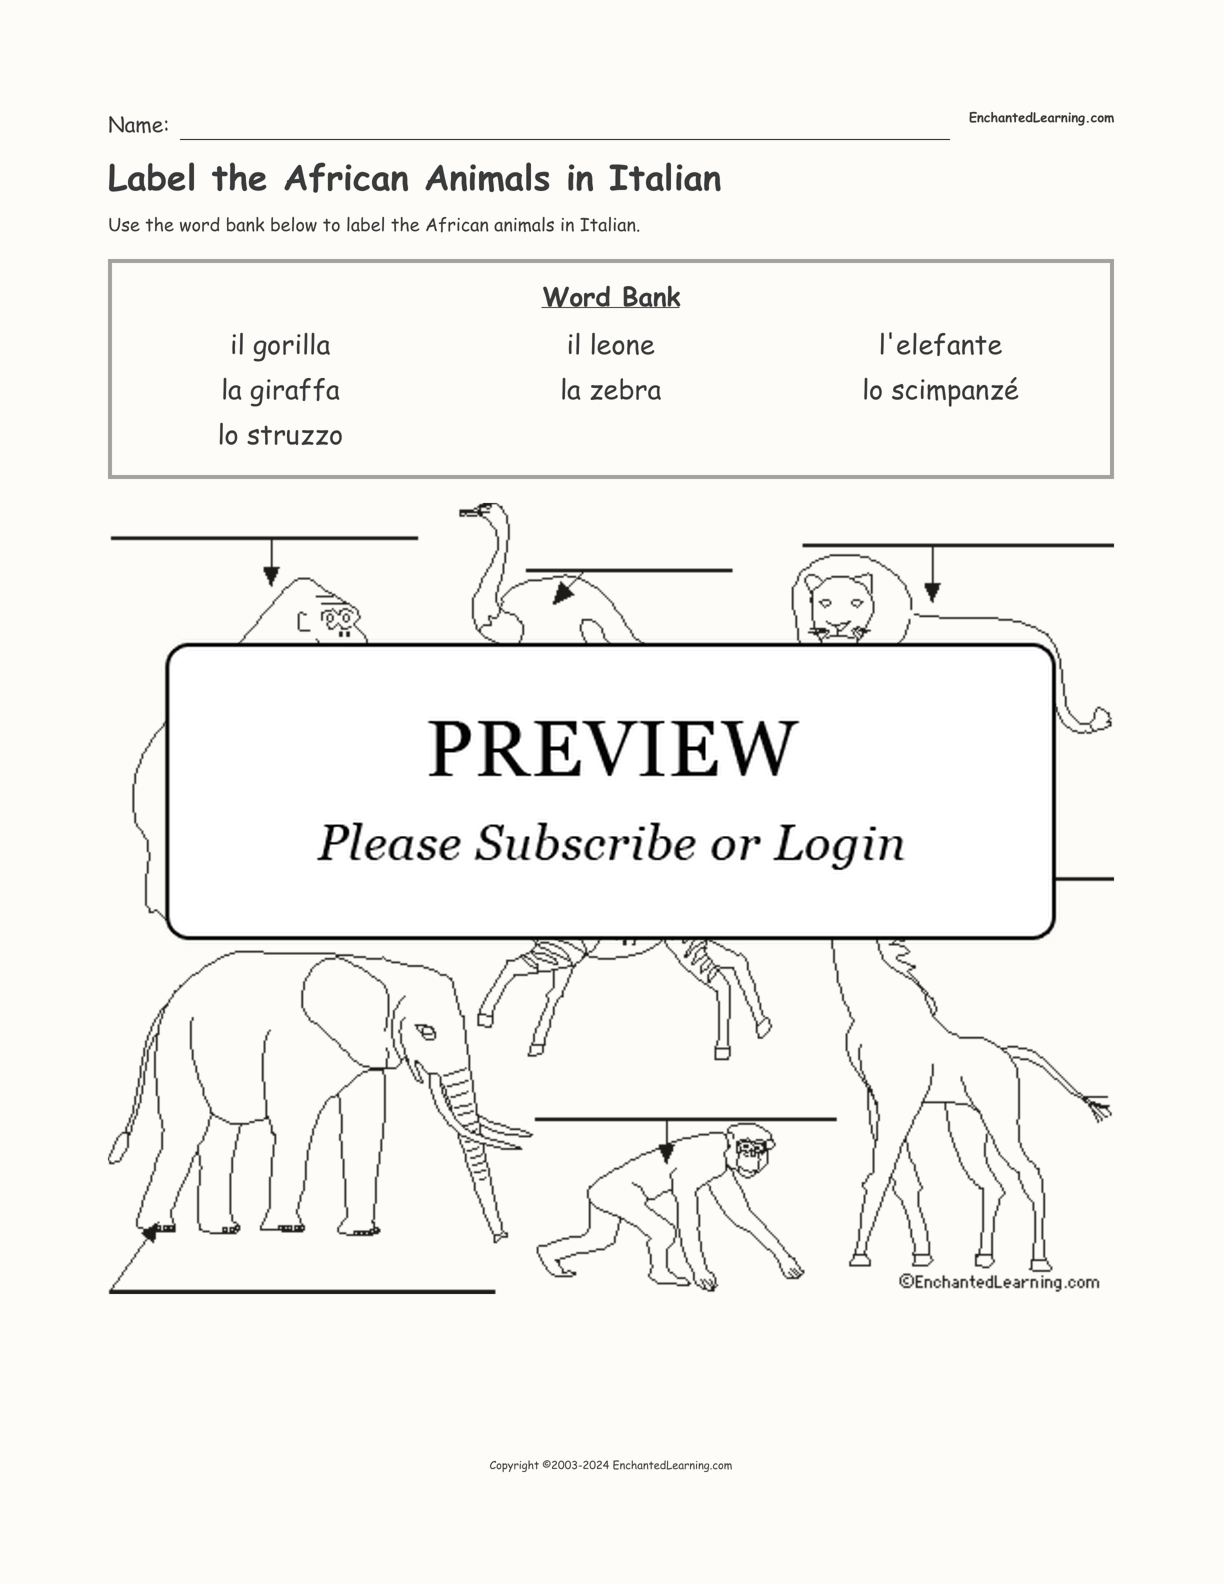 Label the African Animals in Italian interactive worksheet page 1